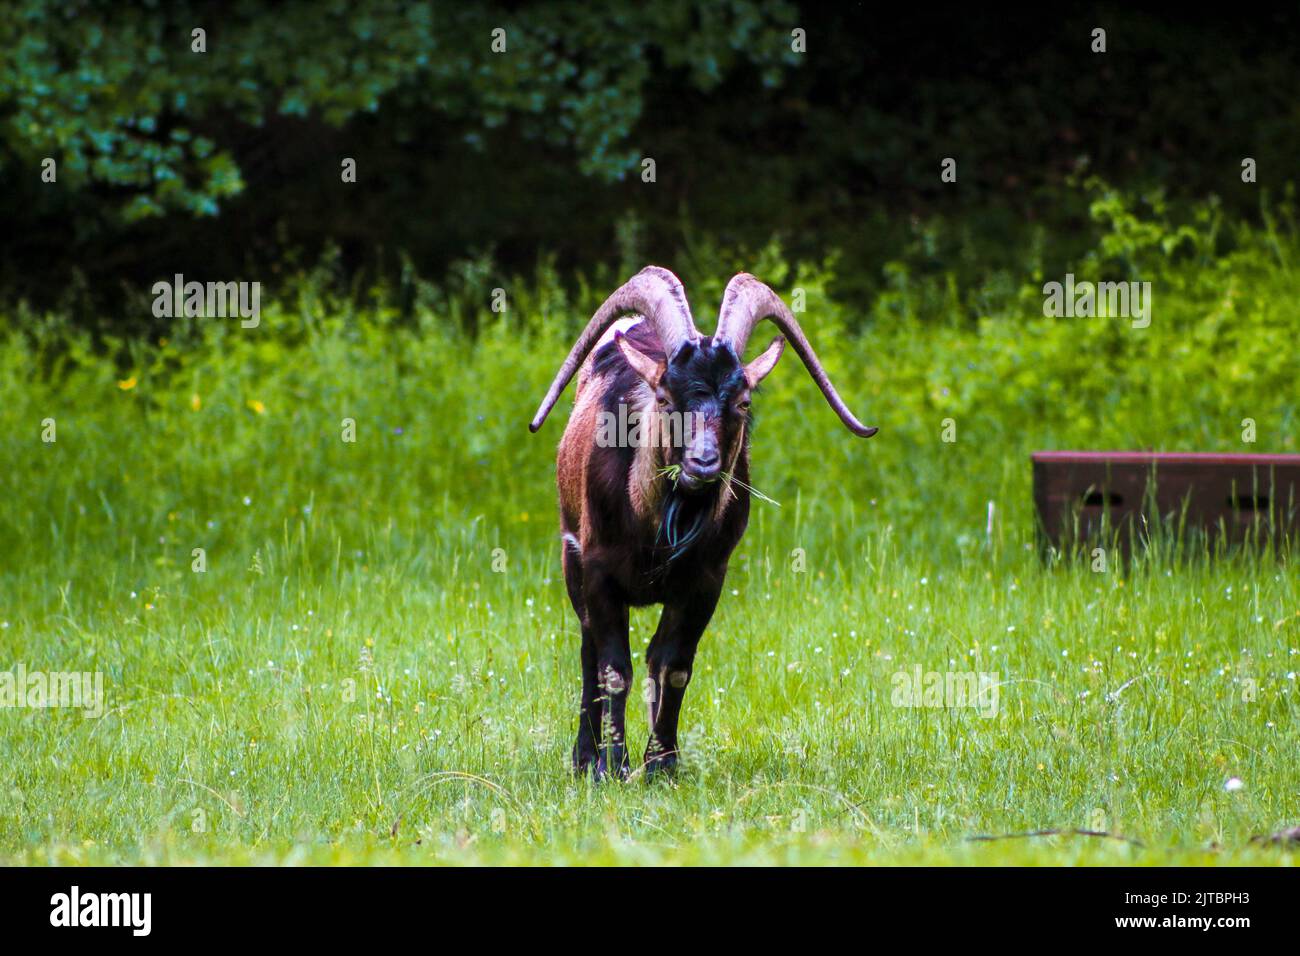 The mountain goat is eating grass in the meadow, selective focus, noise effect Stock Photo